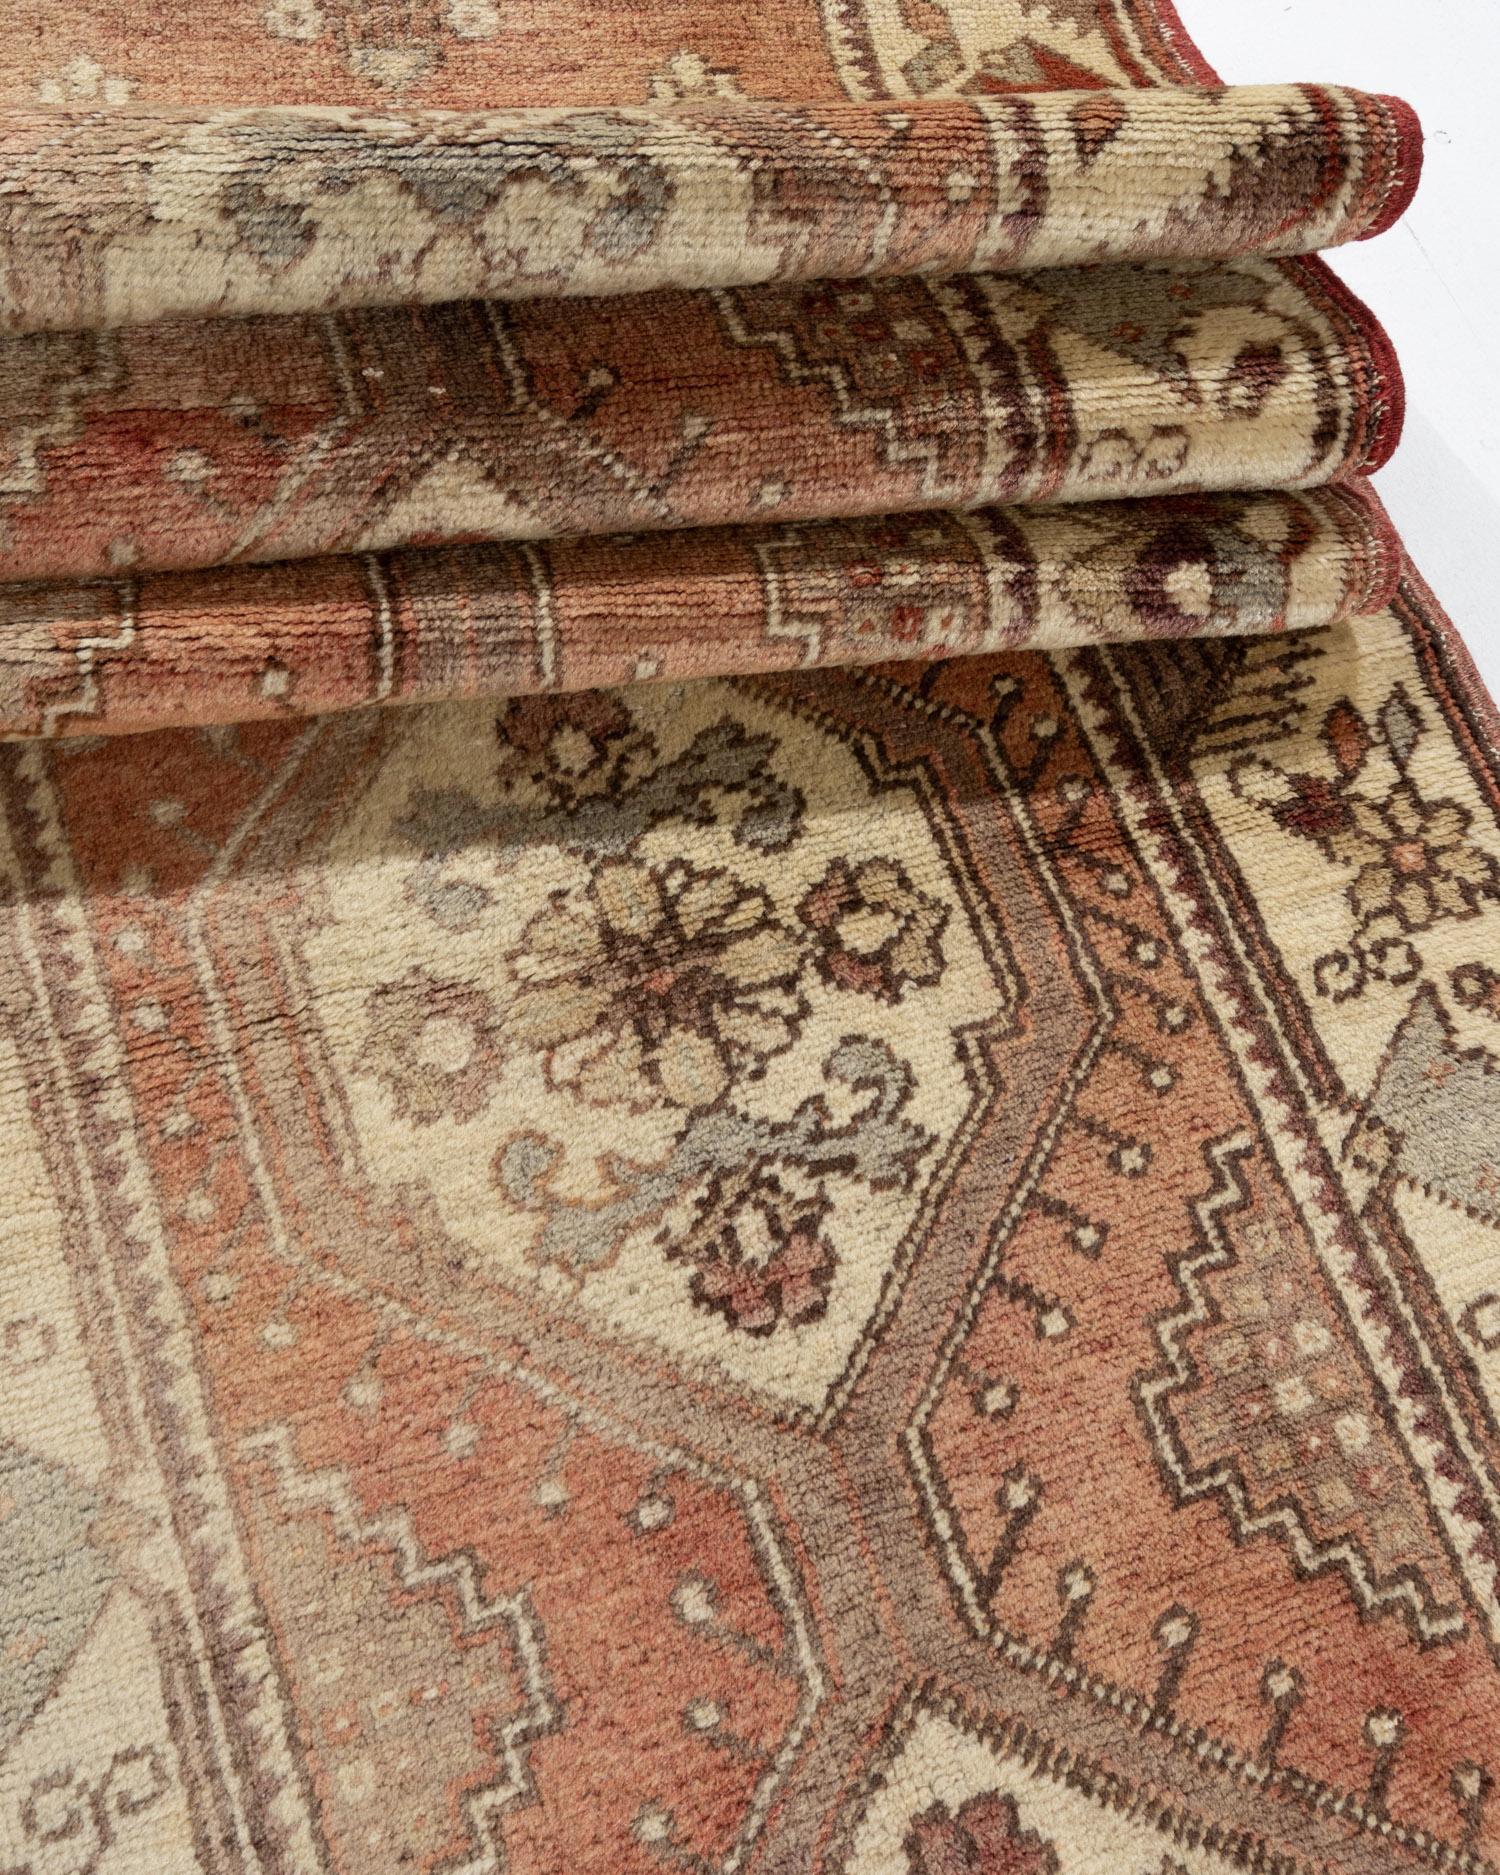 Vintage Turkish Oushak area rugs. Measures: 7'4 X 10'10. From the early years of the Ottoman Empire to the end of the 13th century, Oushak became an important center of Turkish carpet production. All this changed after the mid-nineteenth century,